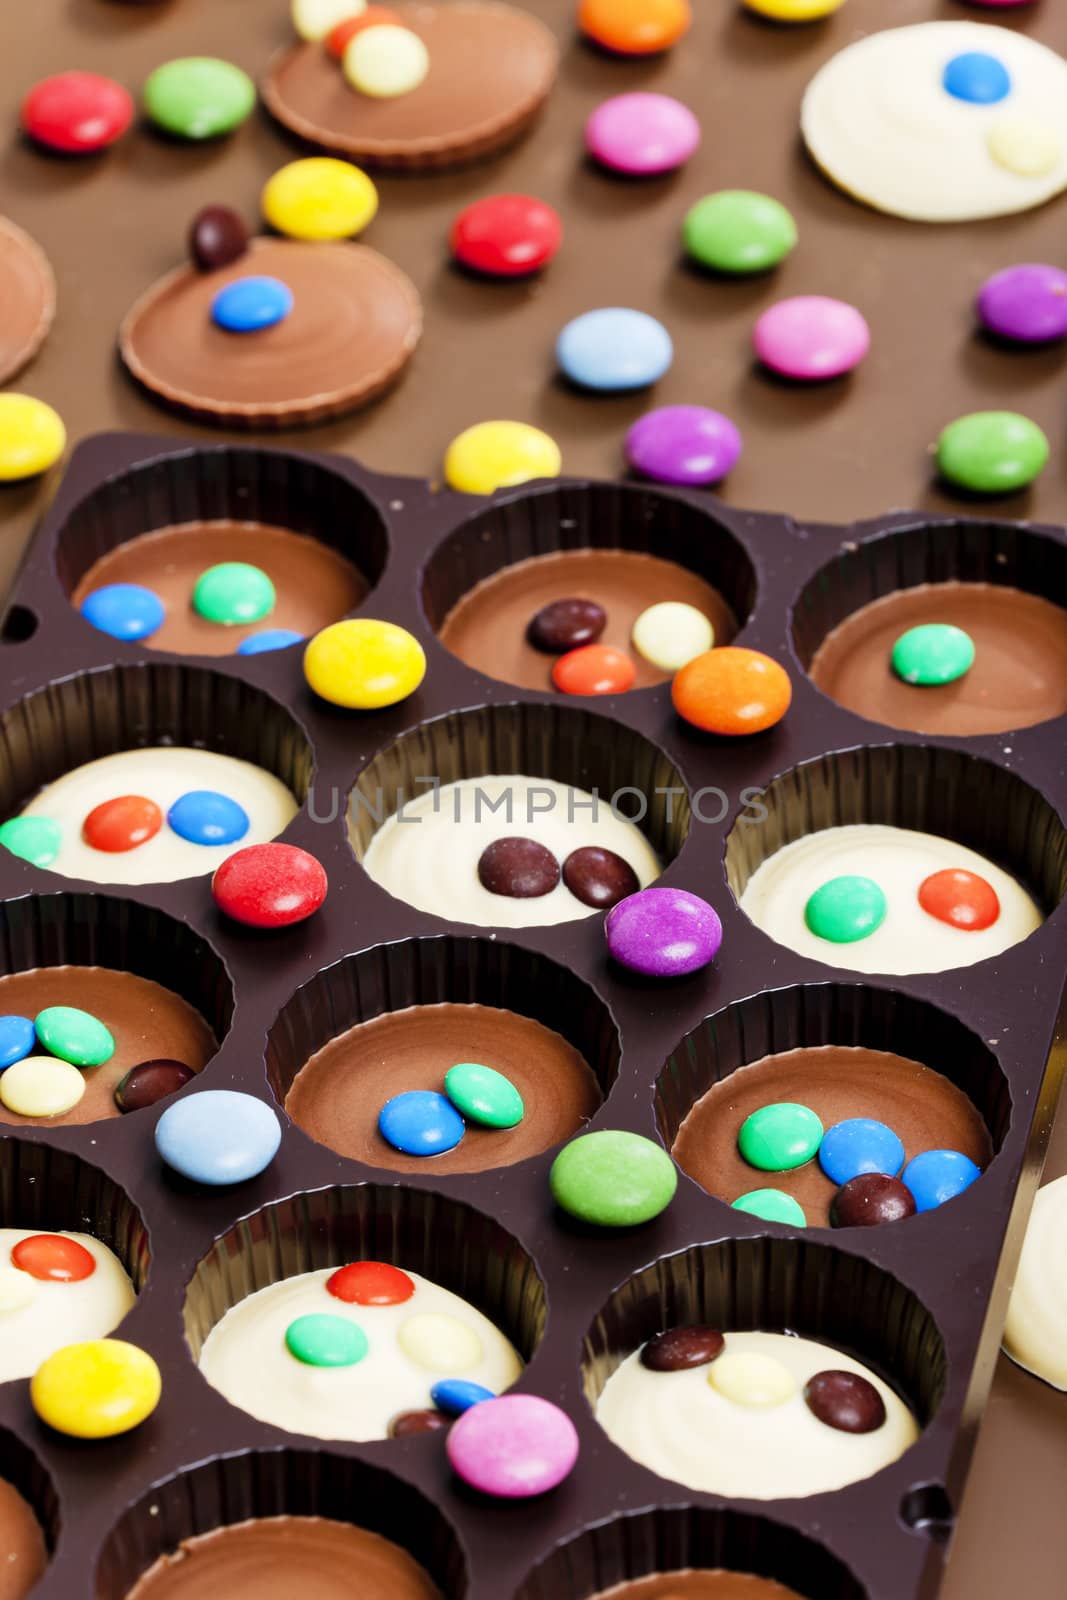 still life of chocolate with smarties by phbcz